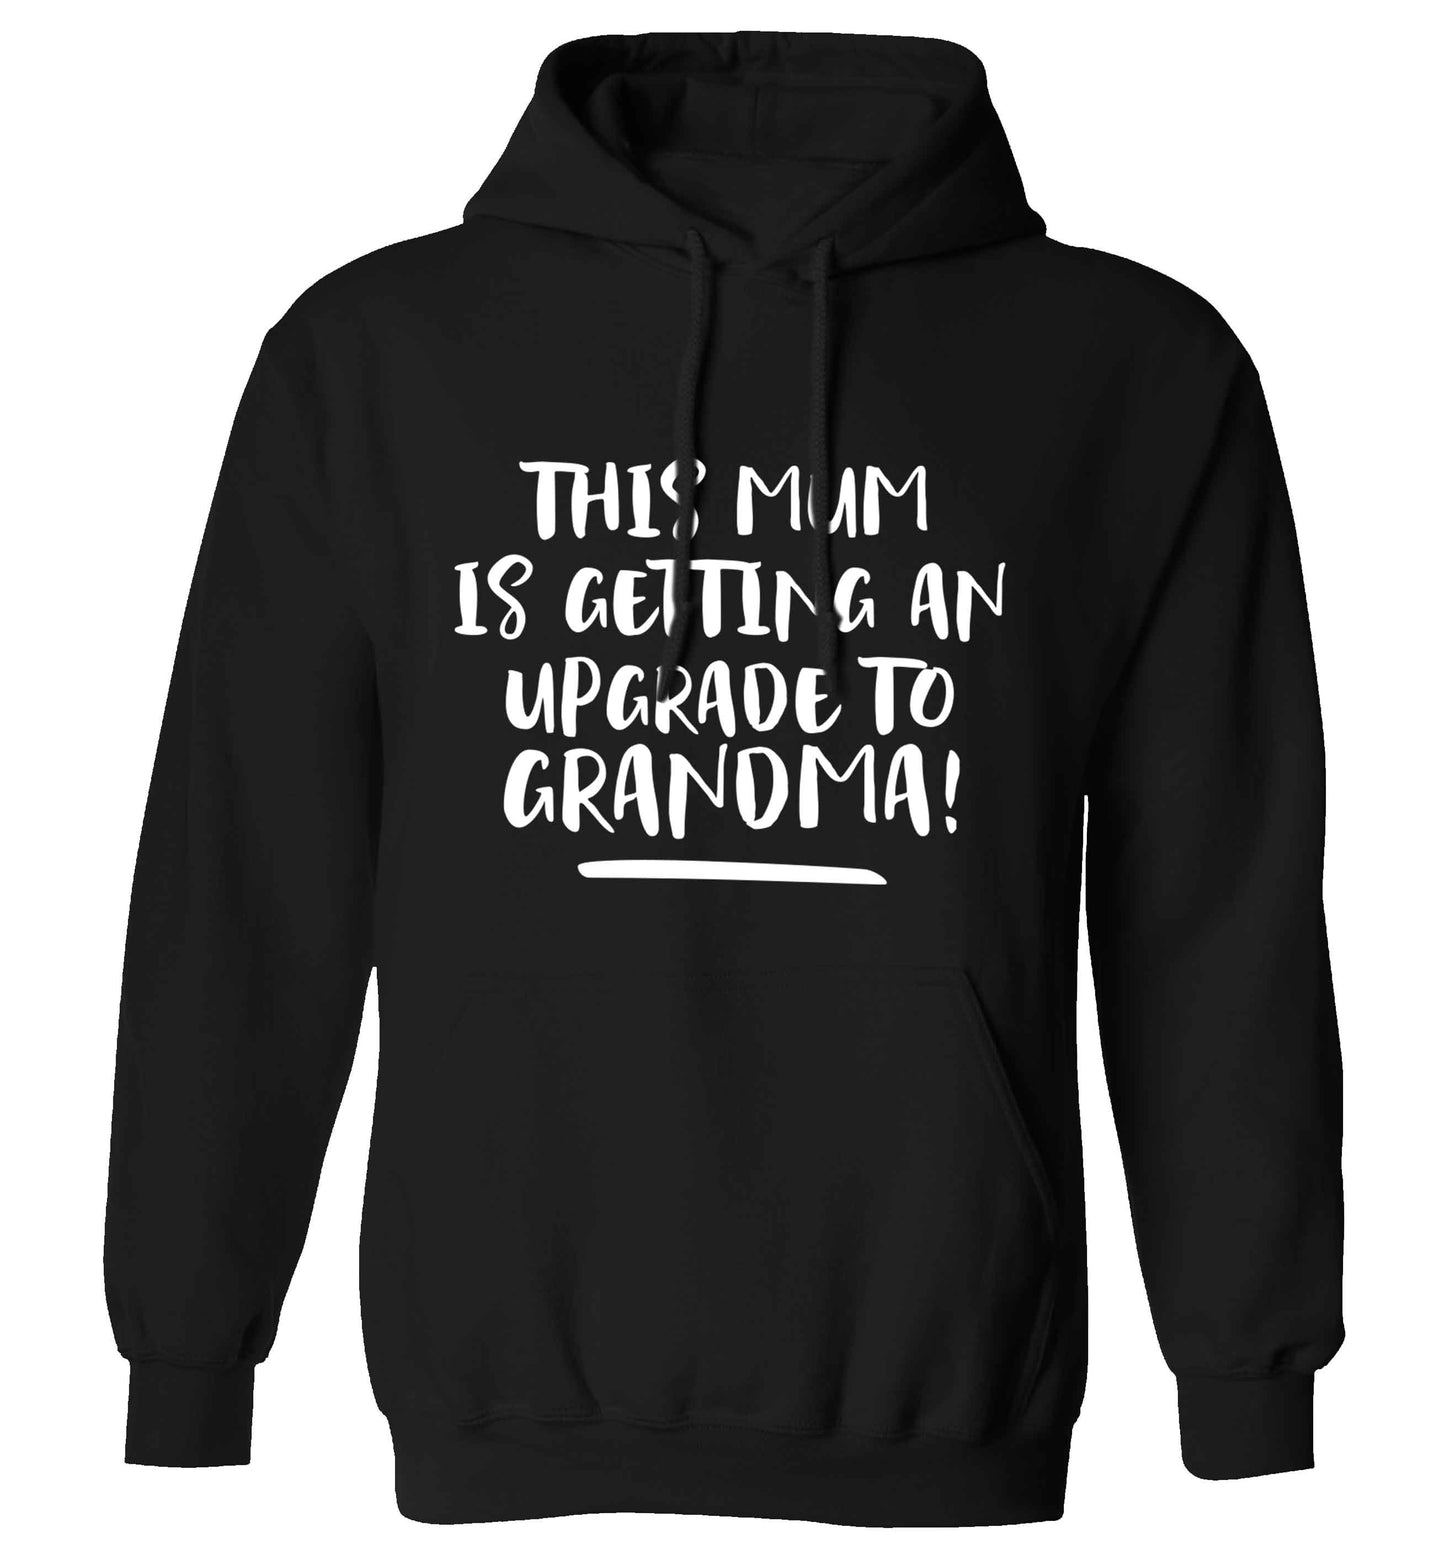 This mum is getting an upgrade to grandma! adults unisex black hoodie 2XL